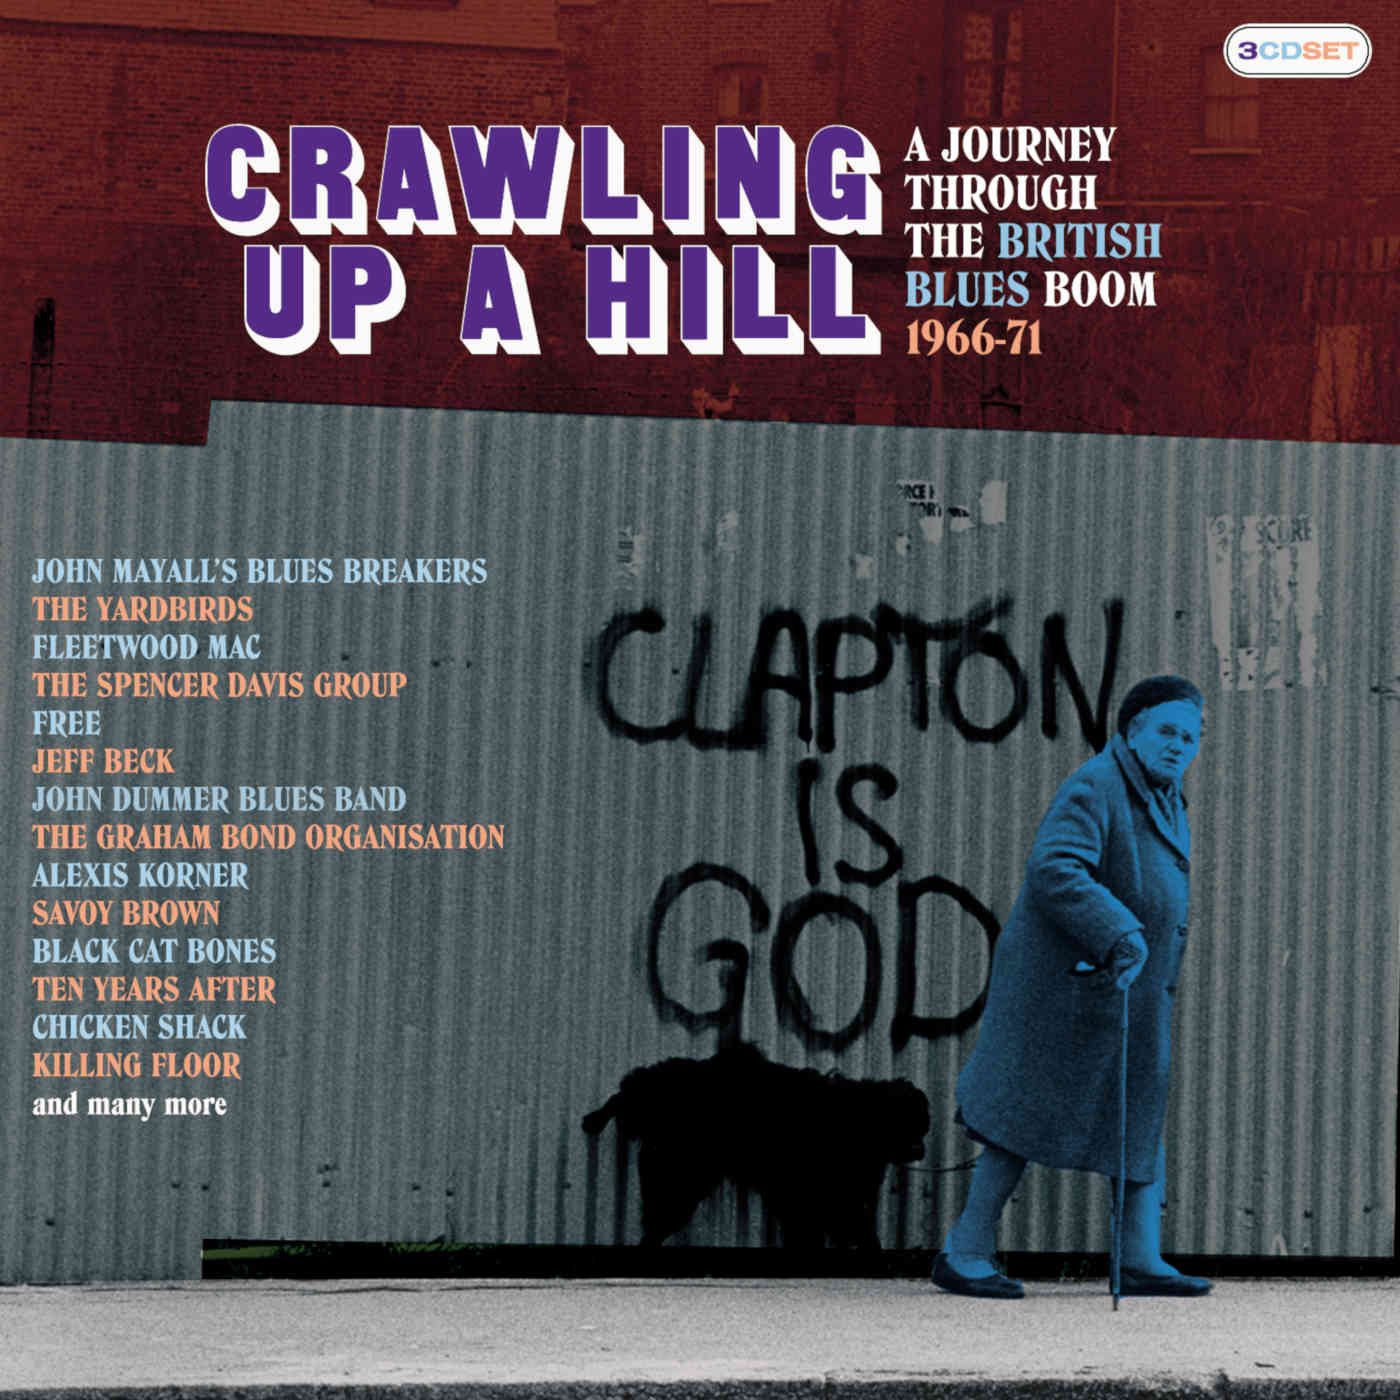 Crawling Up A Hill – A Journey Through The British Blues Boom 1966-71 - 3CD